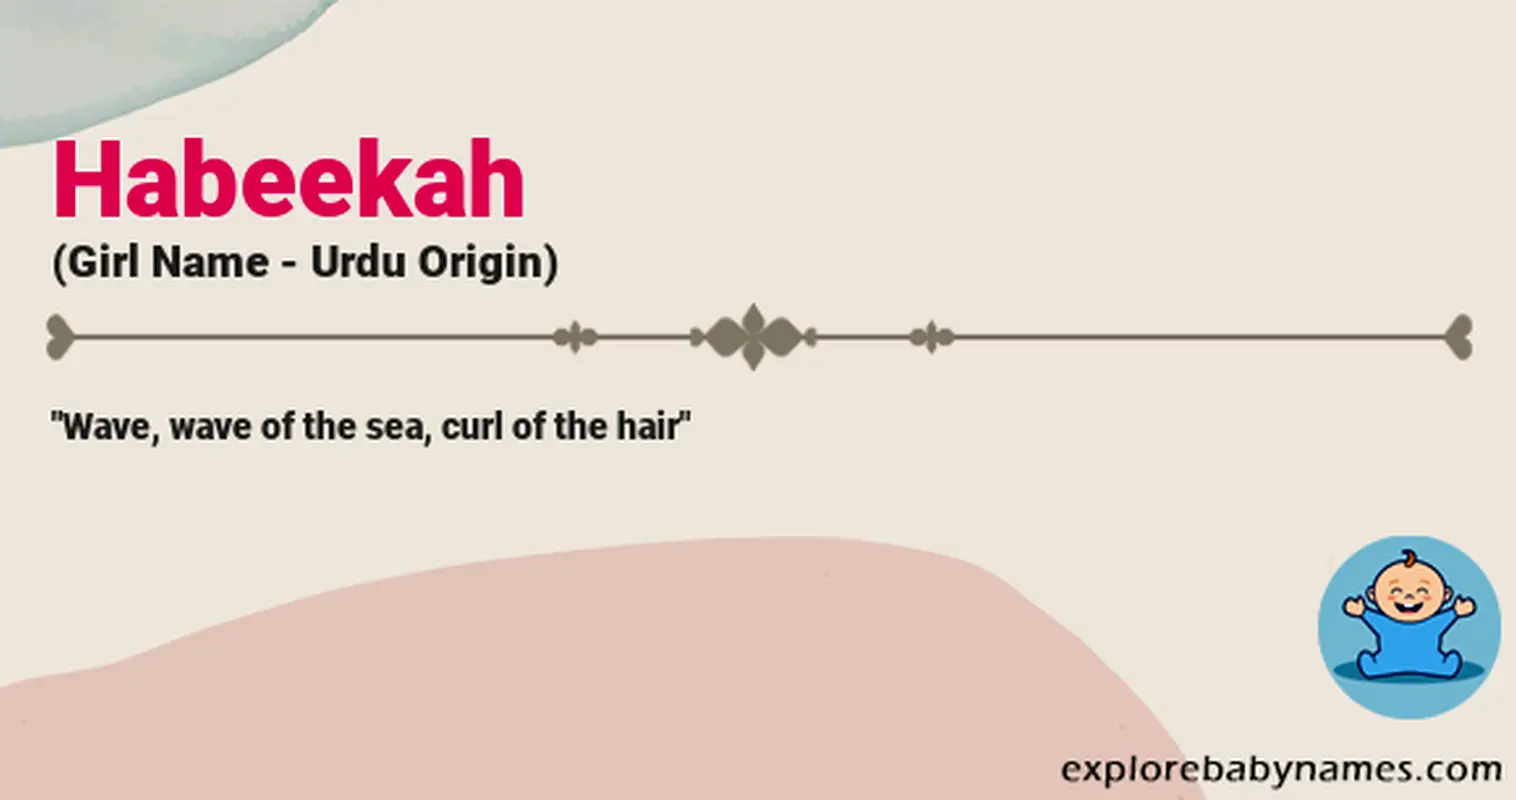 Meaning of Habeekah